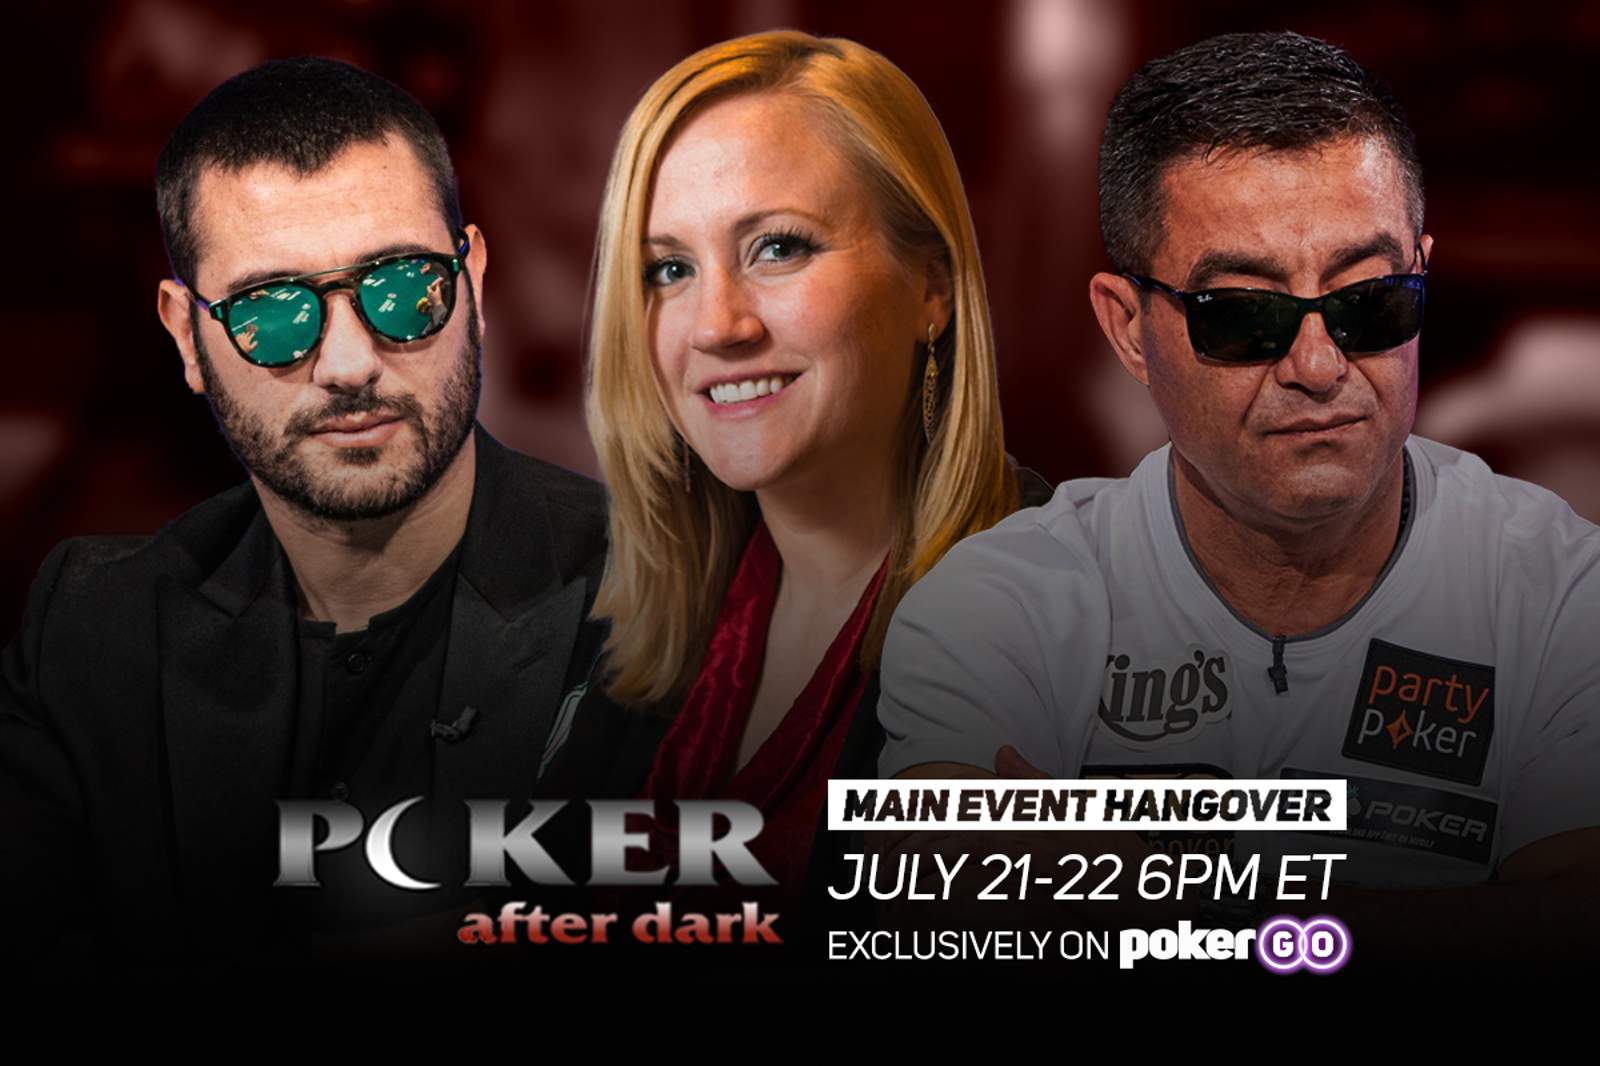 Cure Your "Main Event Hangover" with Poker After Dark Cash Games